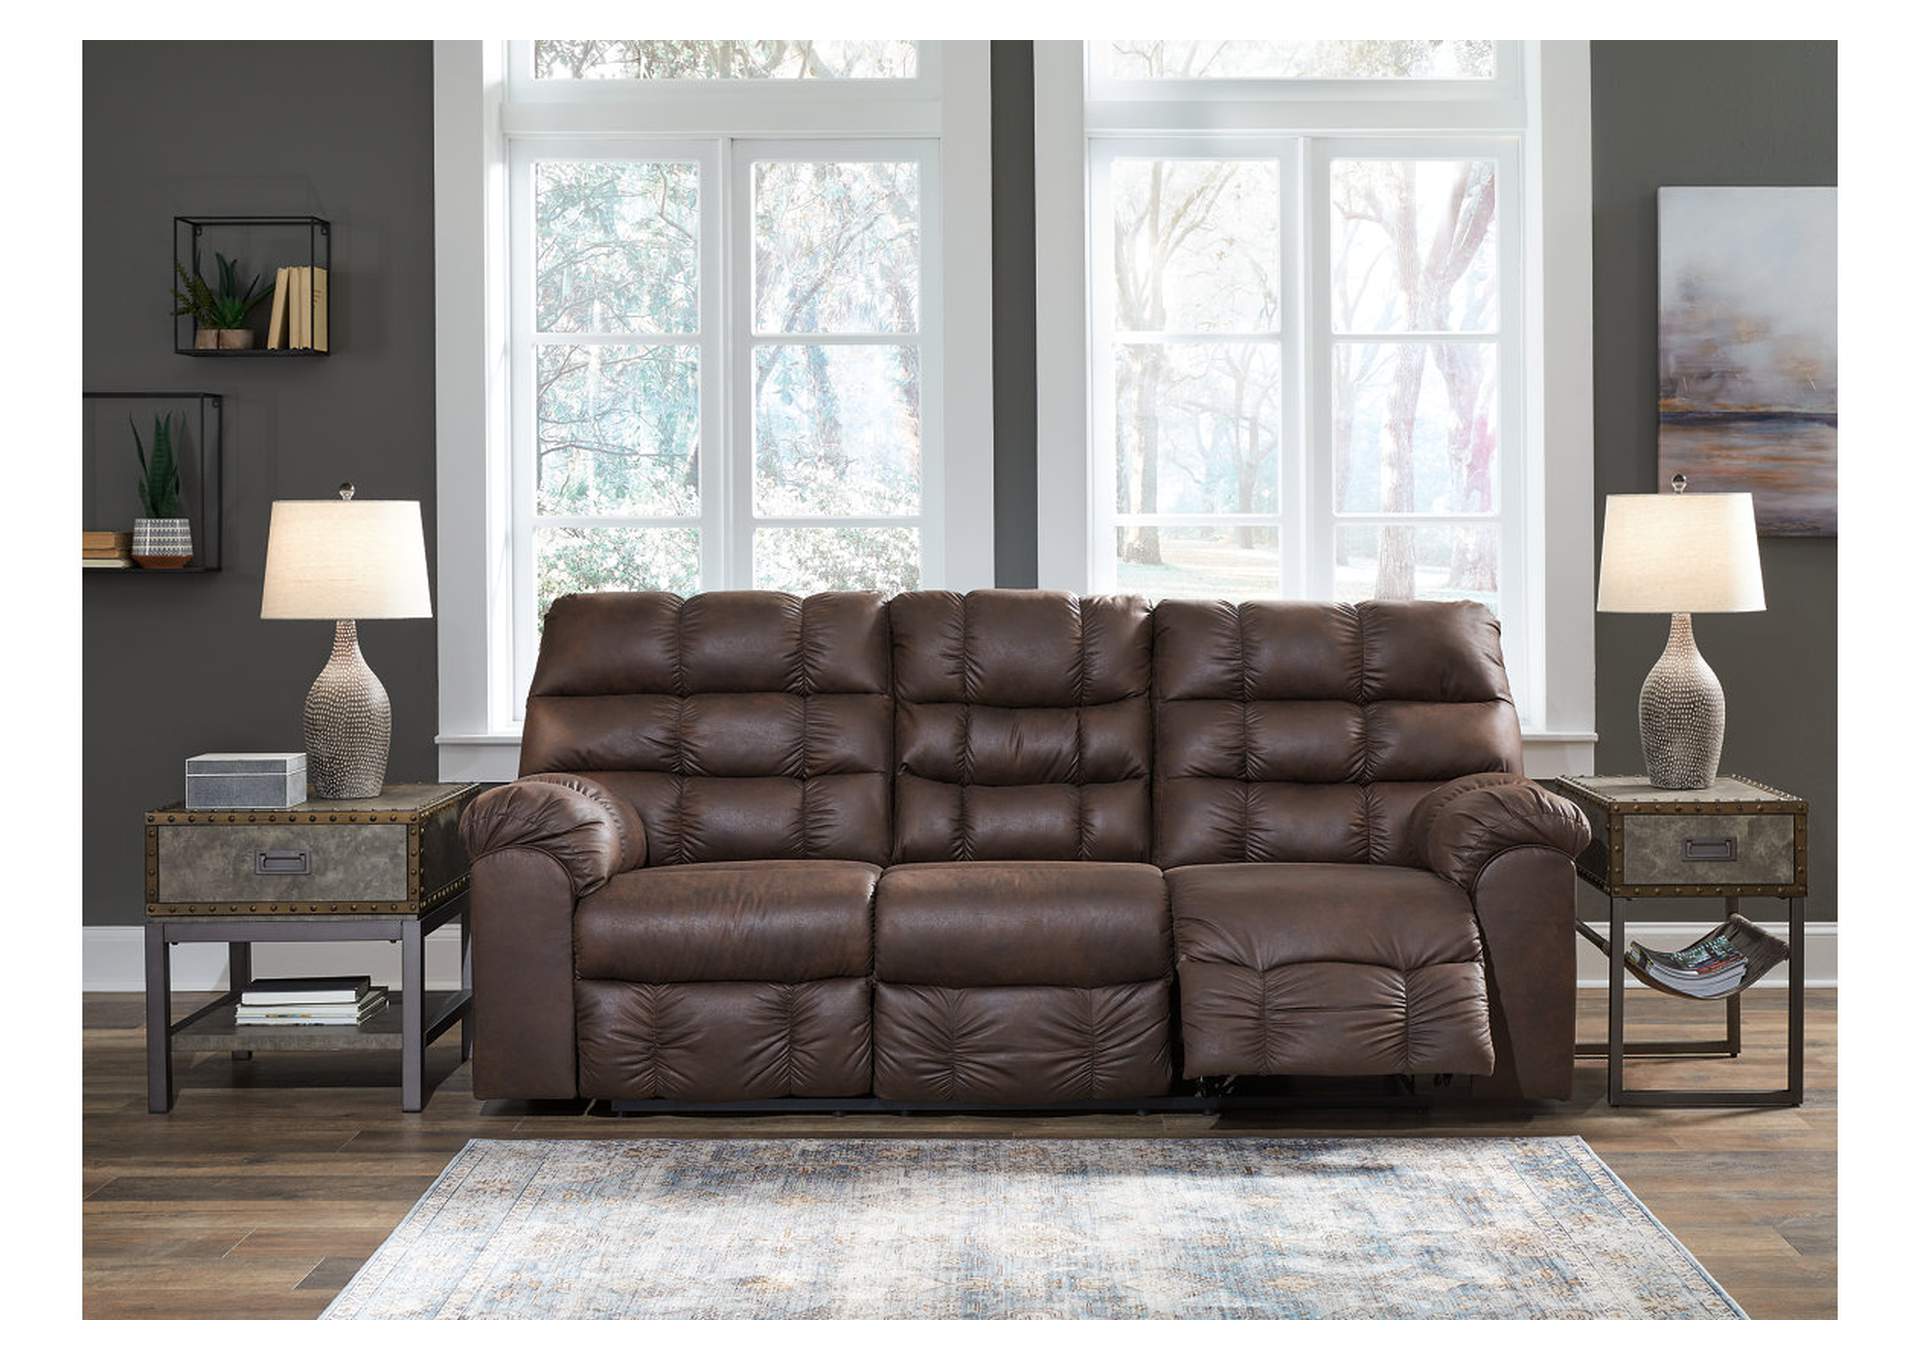 Derwin Reclining Sofa with Drop Down Table,Signature Design By Ashley